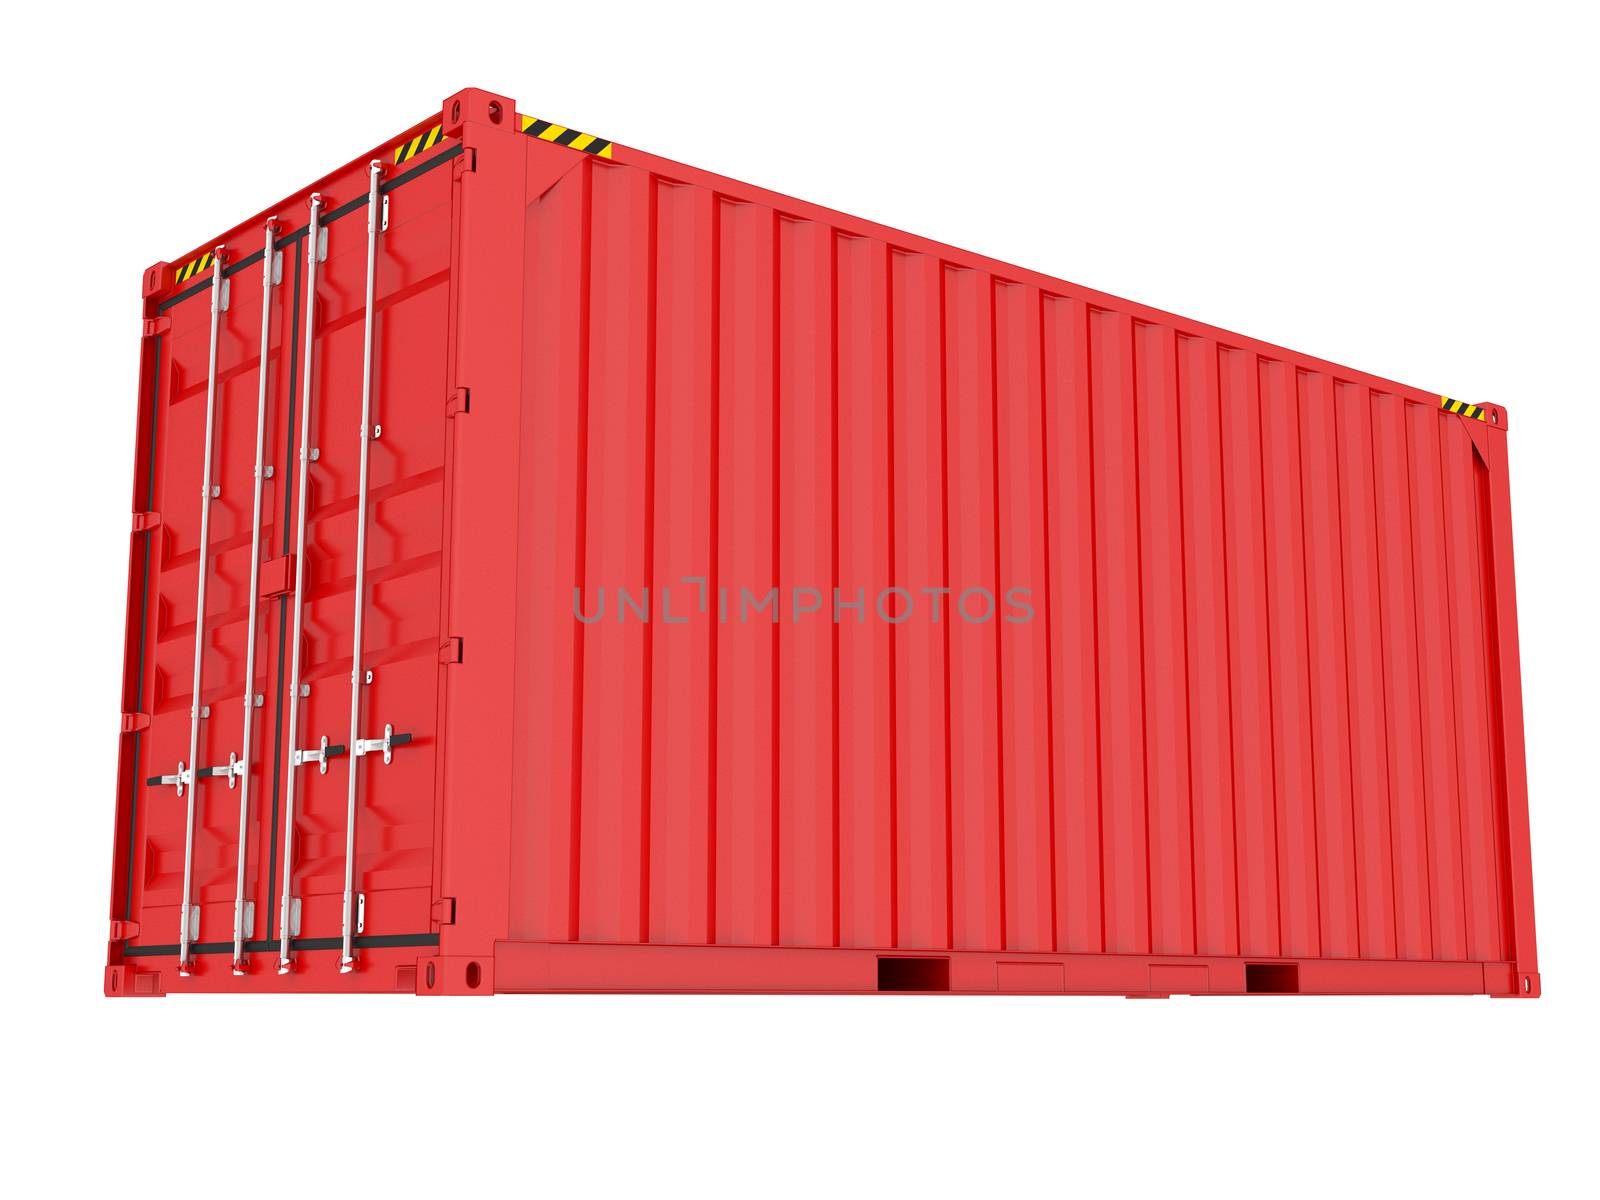 3d rendering of red shipping container. Isolated on white